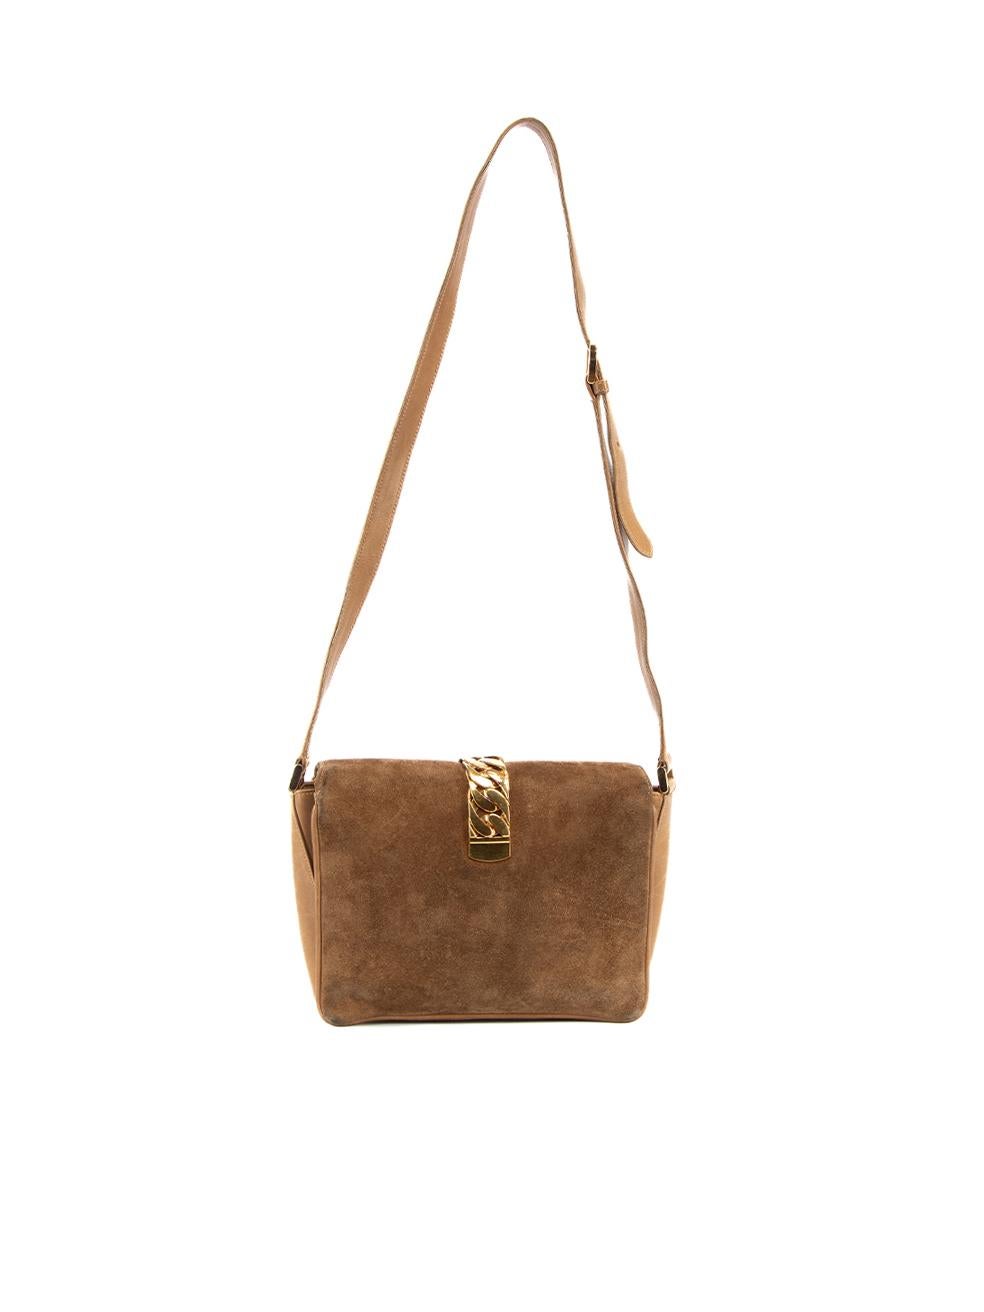 CONDITION is Good. General wear to bag is evident. Overall wear to suede exterior, tarnishing to the gold chain accent and pen marks to the interior suede material can be seen on this used Gucci designer resale item. Details Brown Suede and leather